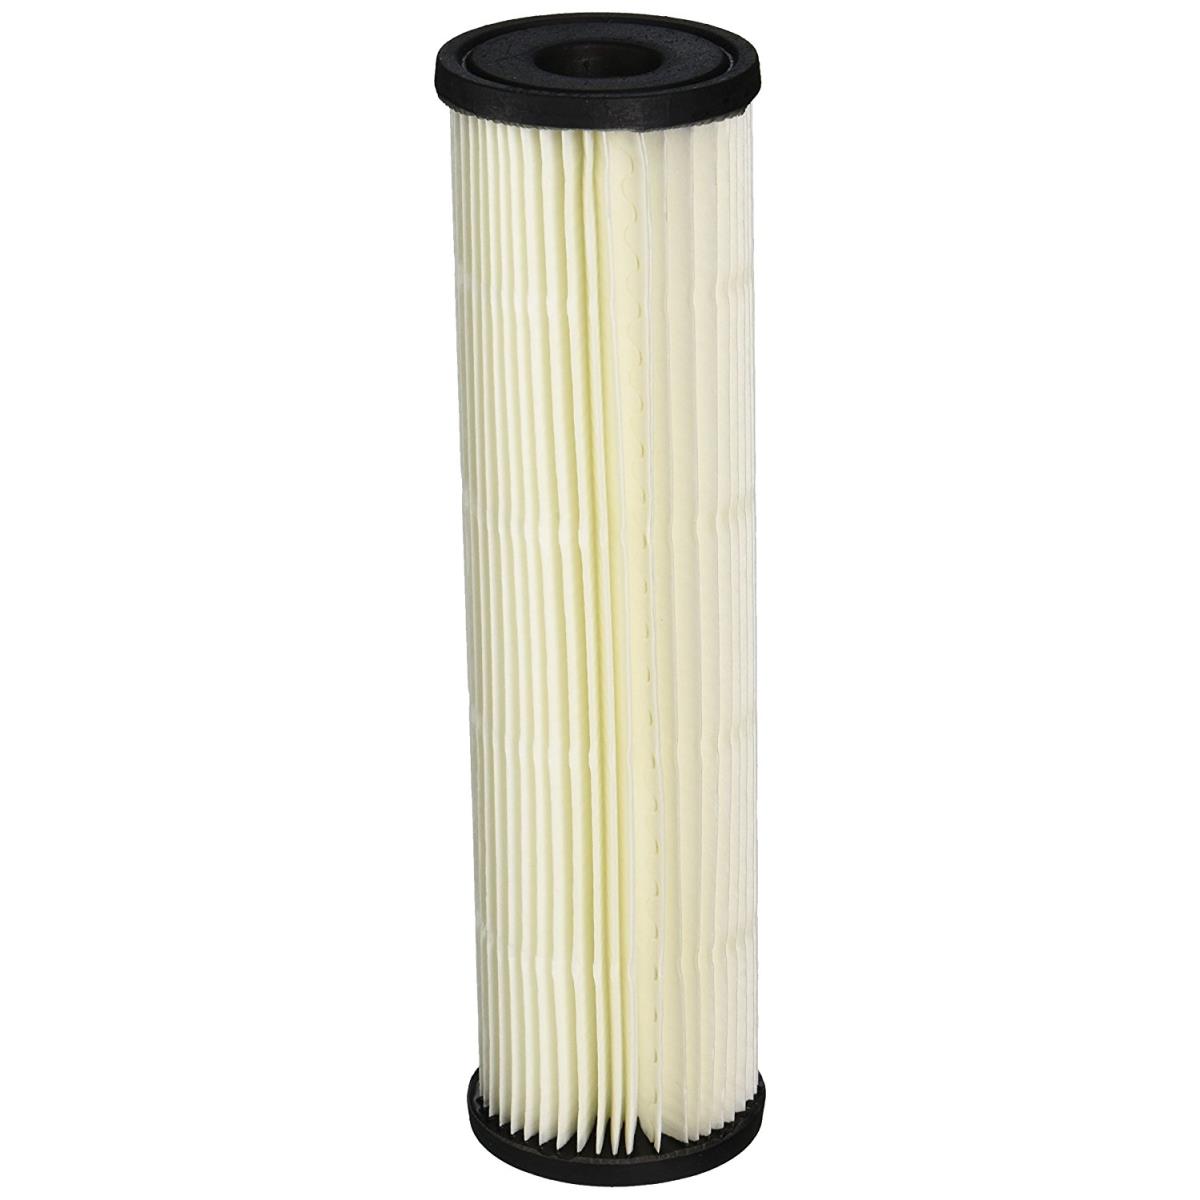 Pleated Cellulose Pentek Whole House Filter Replacement Cartridge